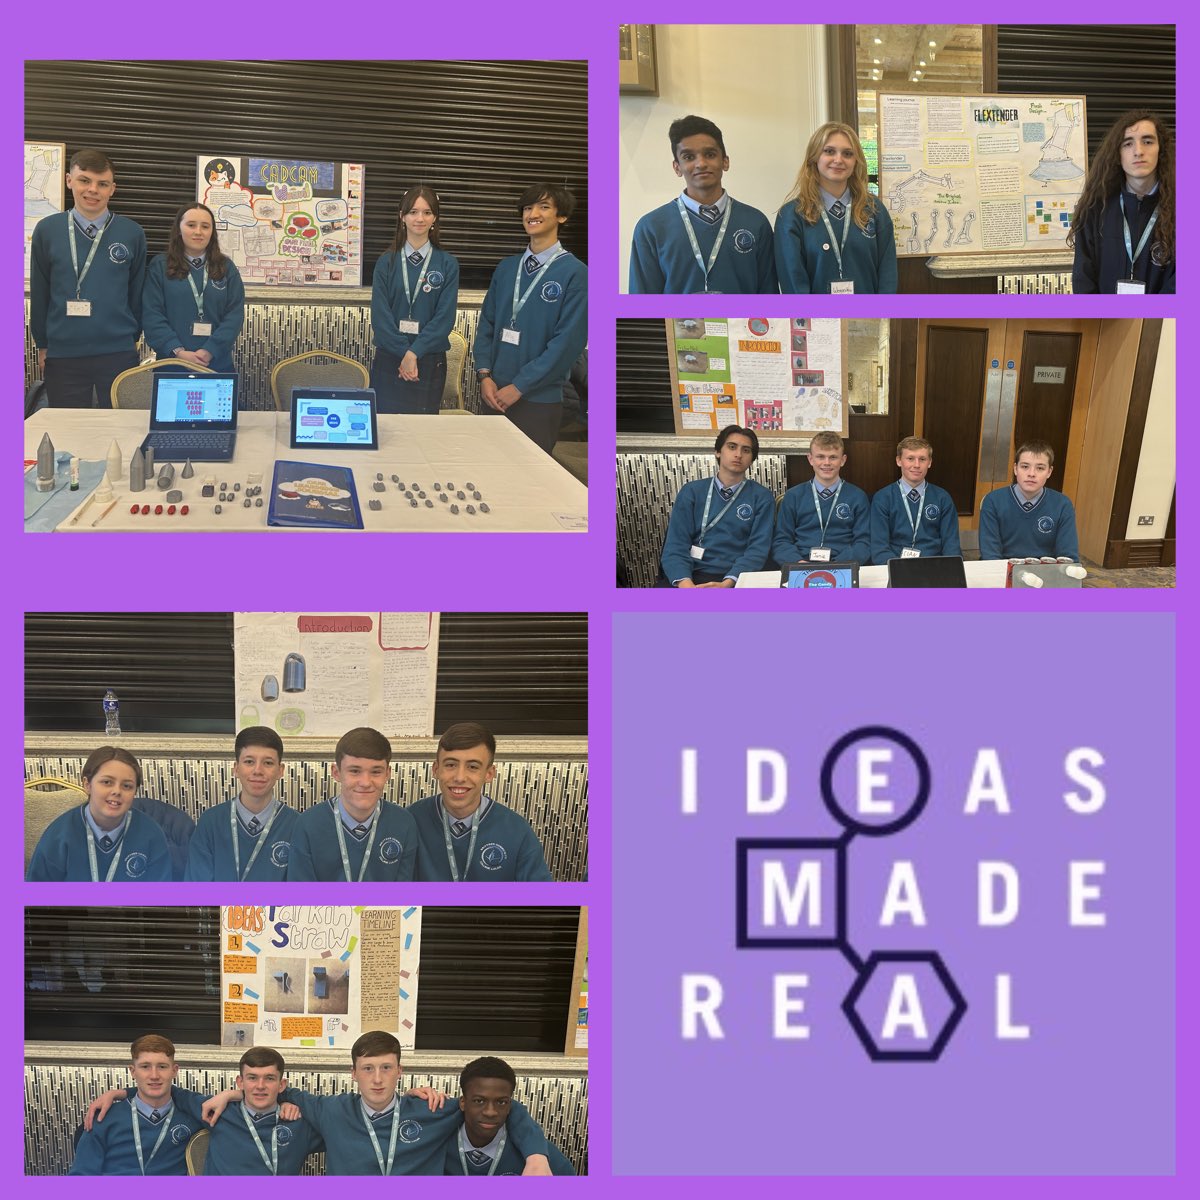 Our TY #ideasmadereal 3D Printing Challenge Groups set up & ready to present to the adjudicators here in Mullingar! We are very proud of all the hard work they have put in over the year preparing for this competition! @IMR_ie #3Dprinting #STEM #excellenceineducation @ddletb